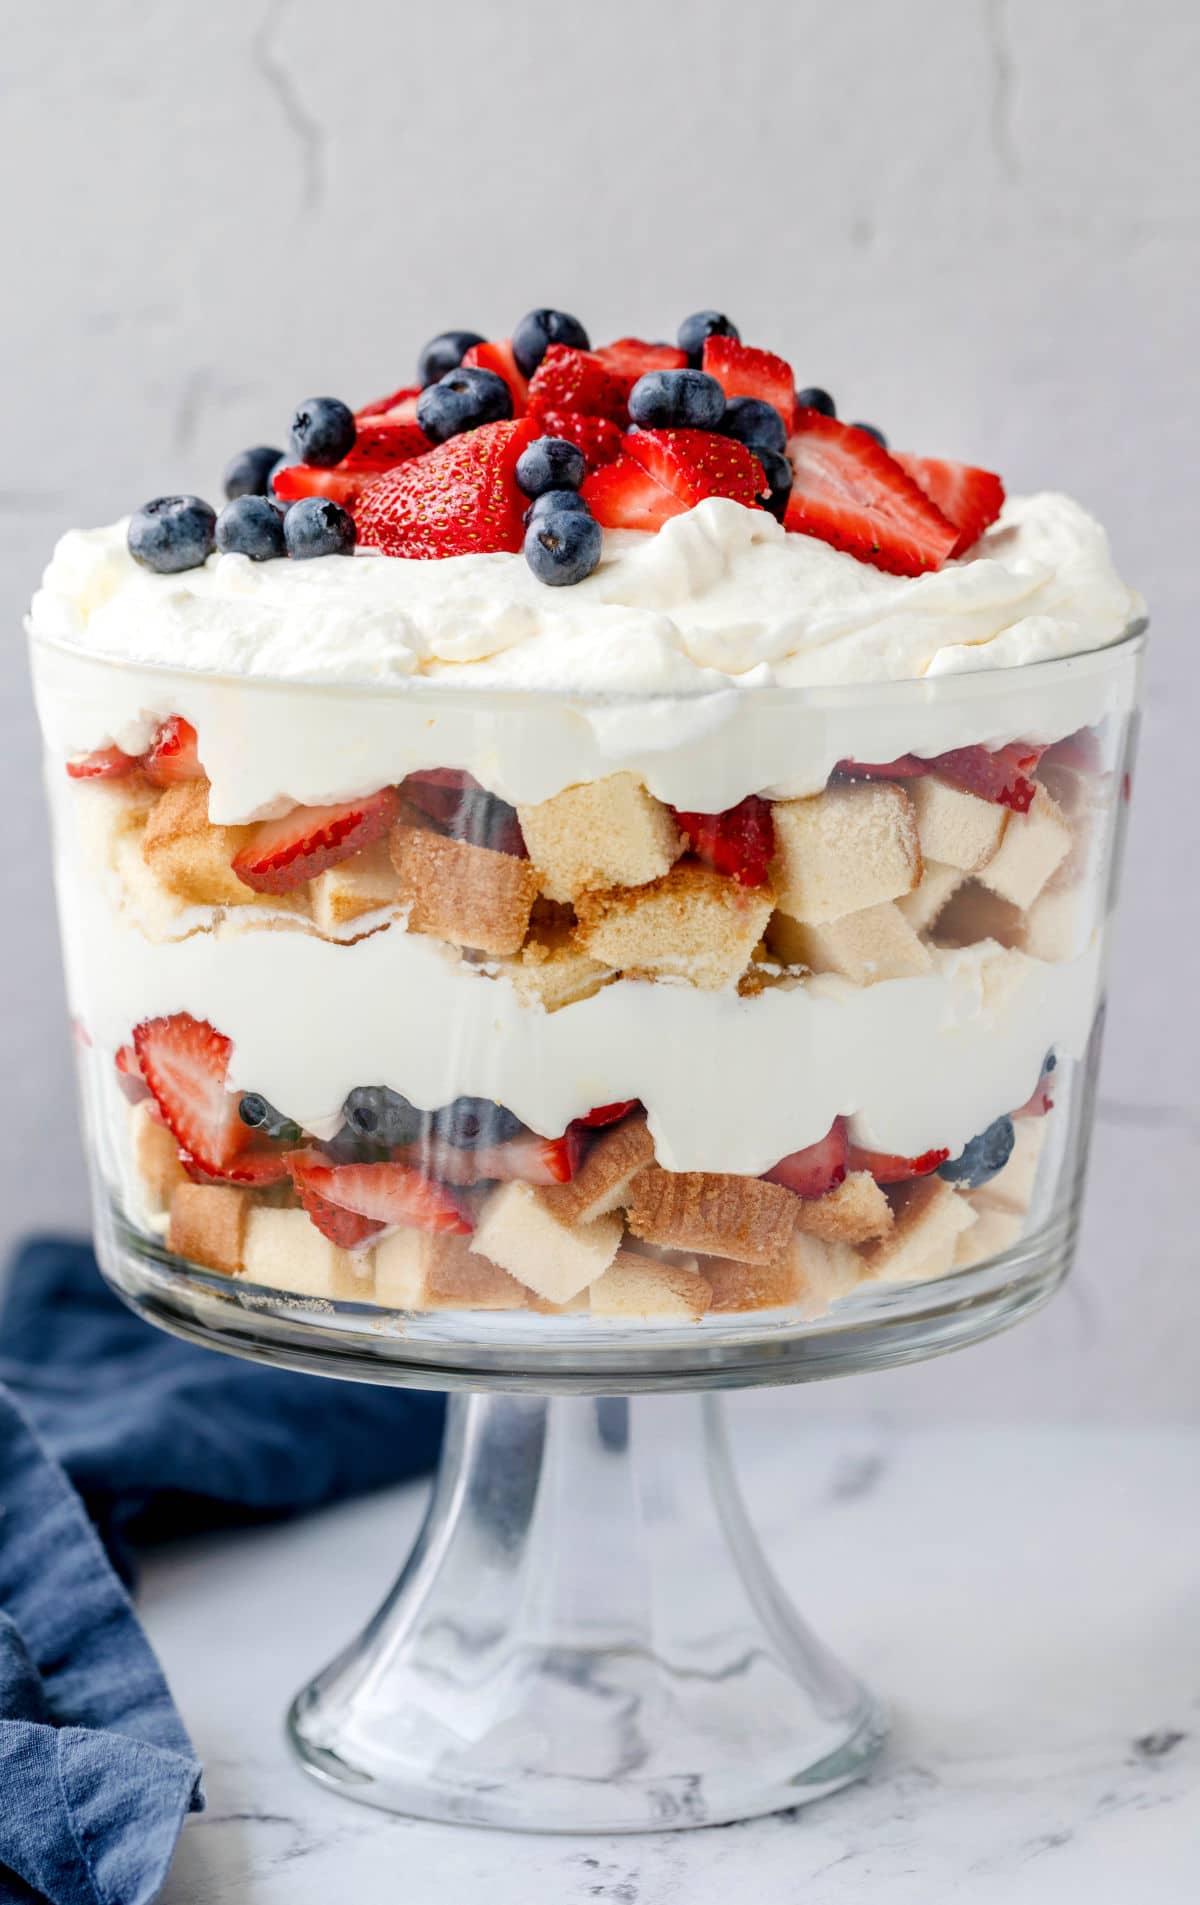 Red white and blue trifle in a beautiful glass bowl so you can see each colorful layer. It's topped with whipped cream, strawberries, and blueberries